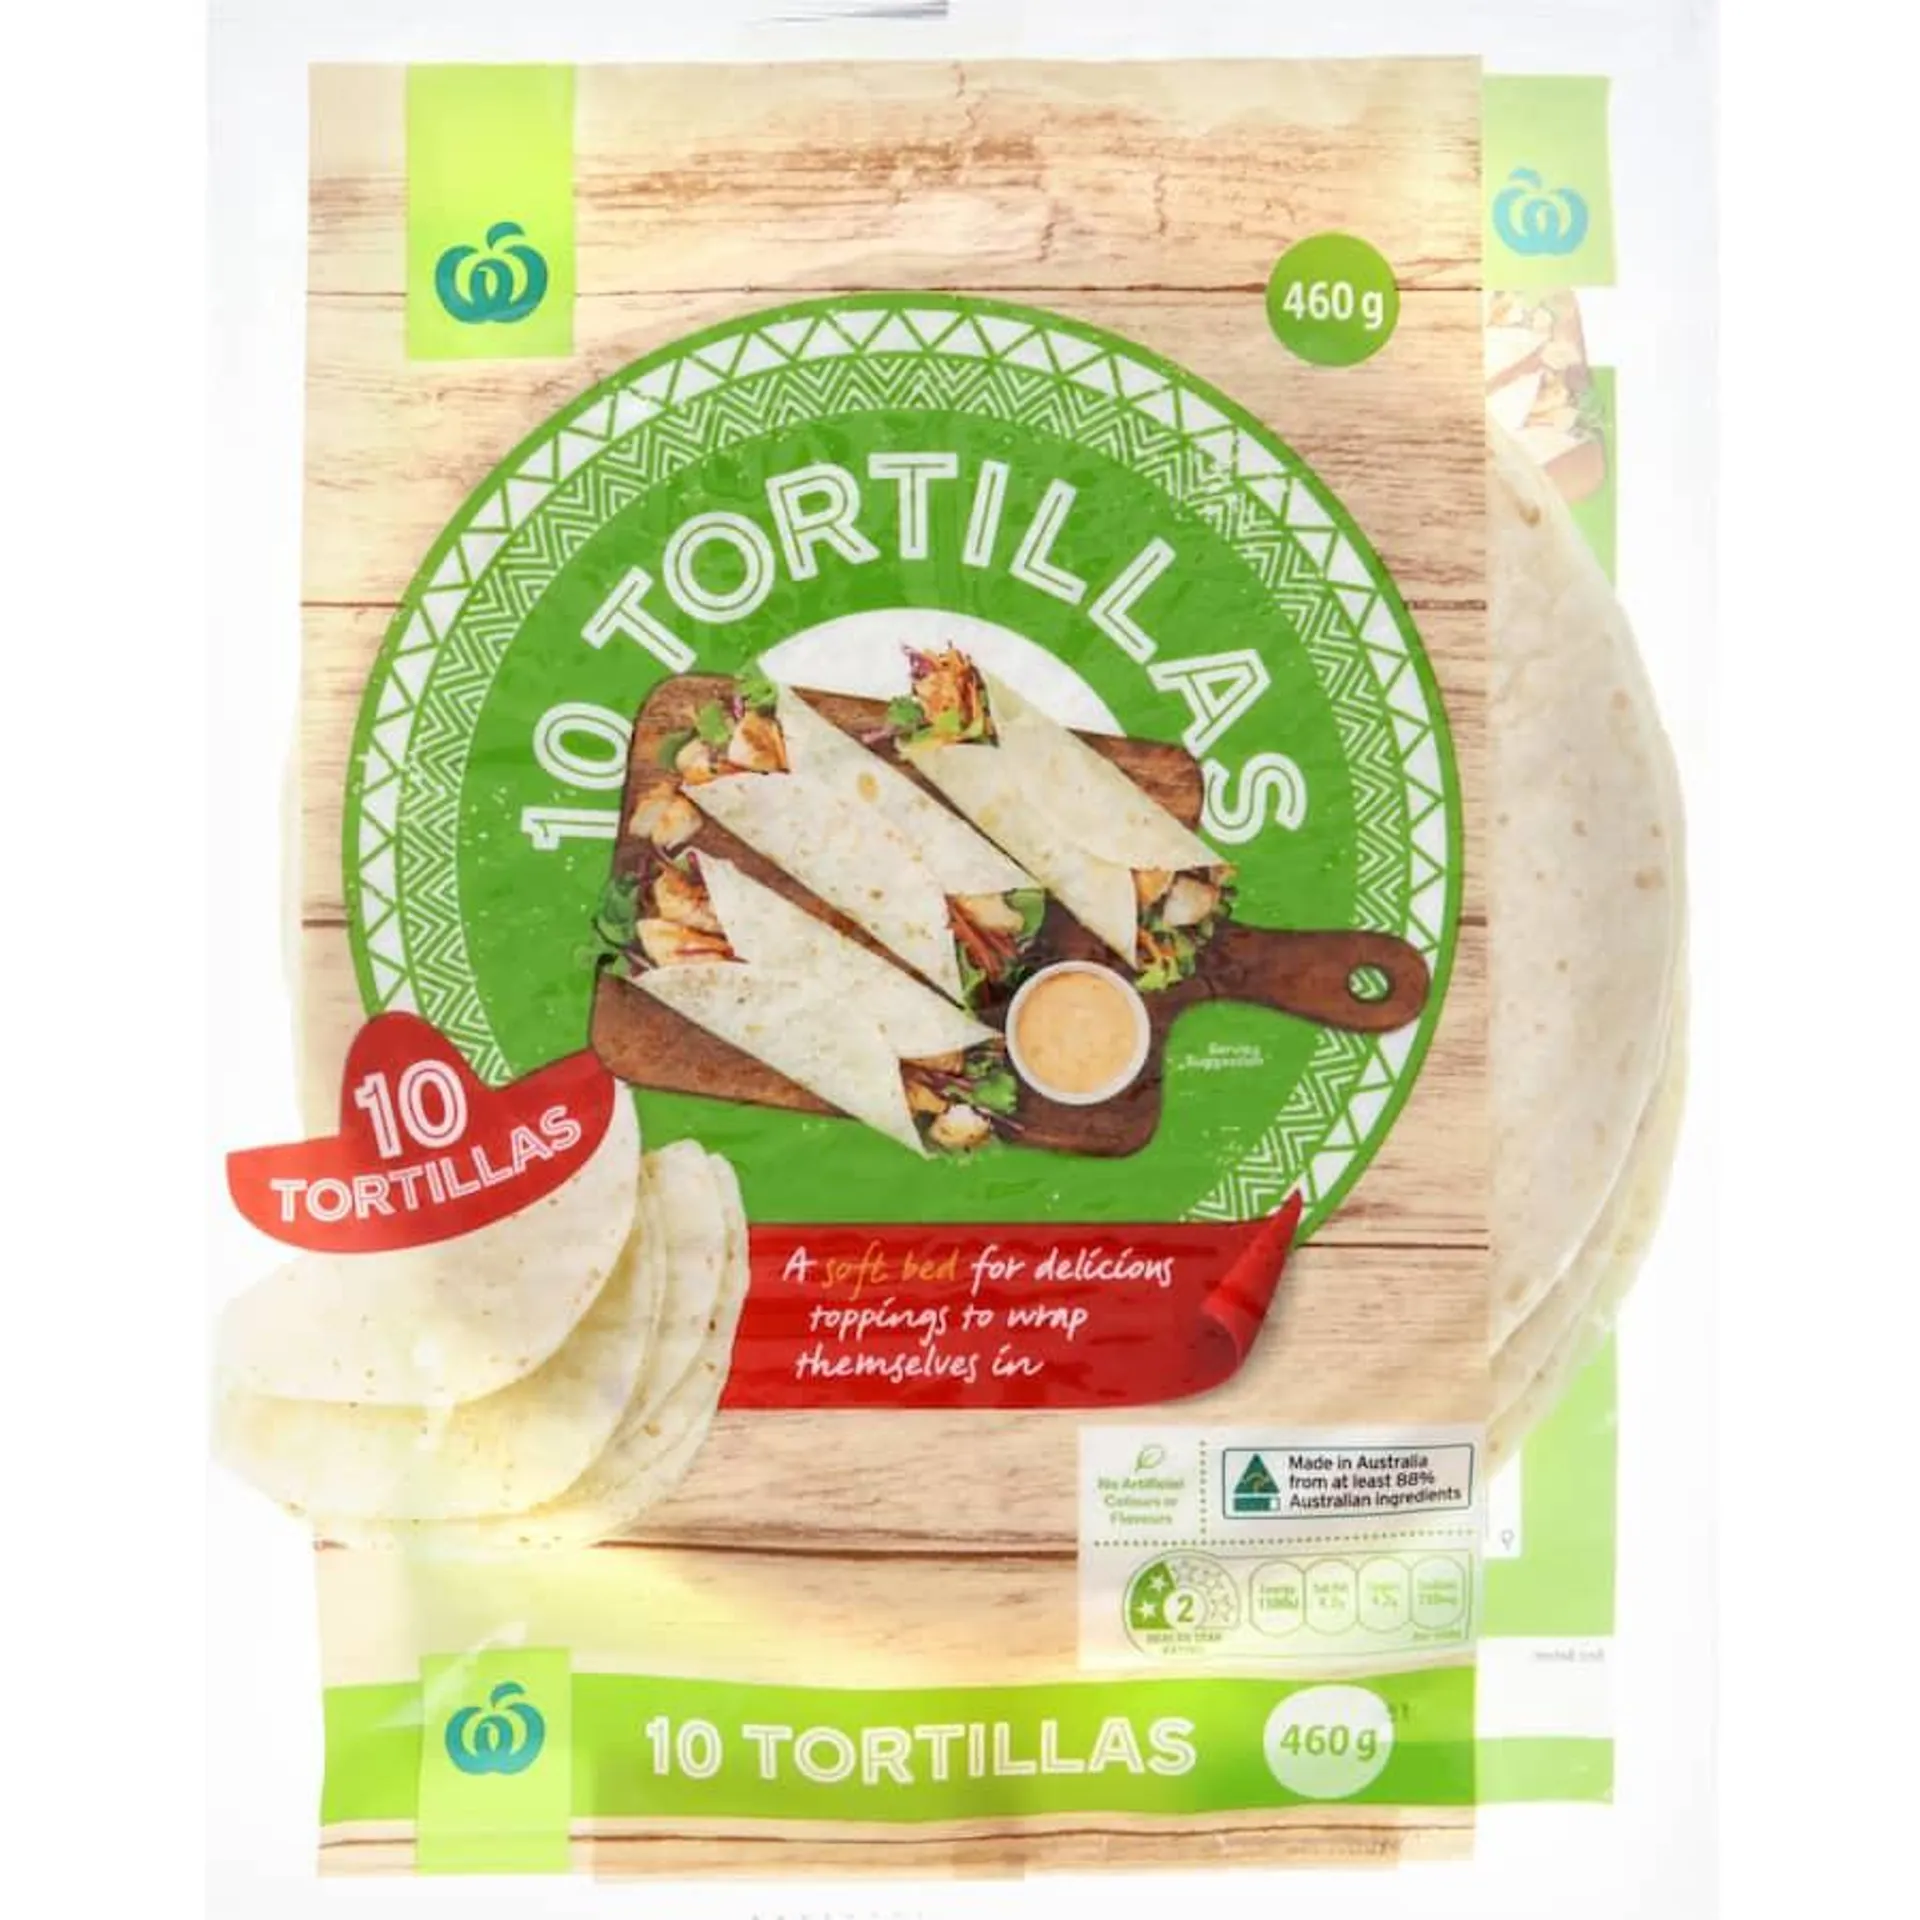 Woolworths Mexican Tortillas 460g